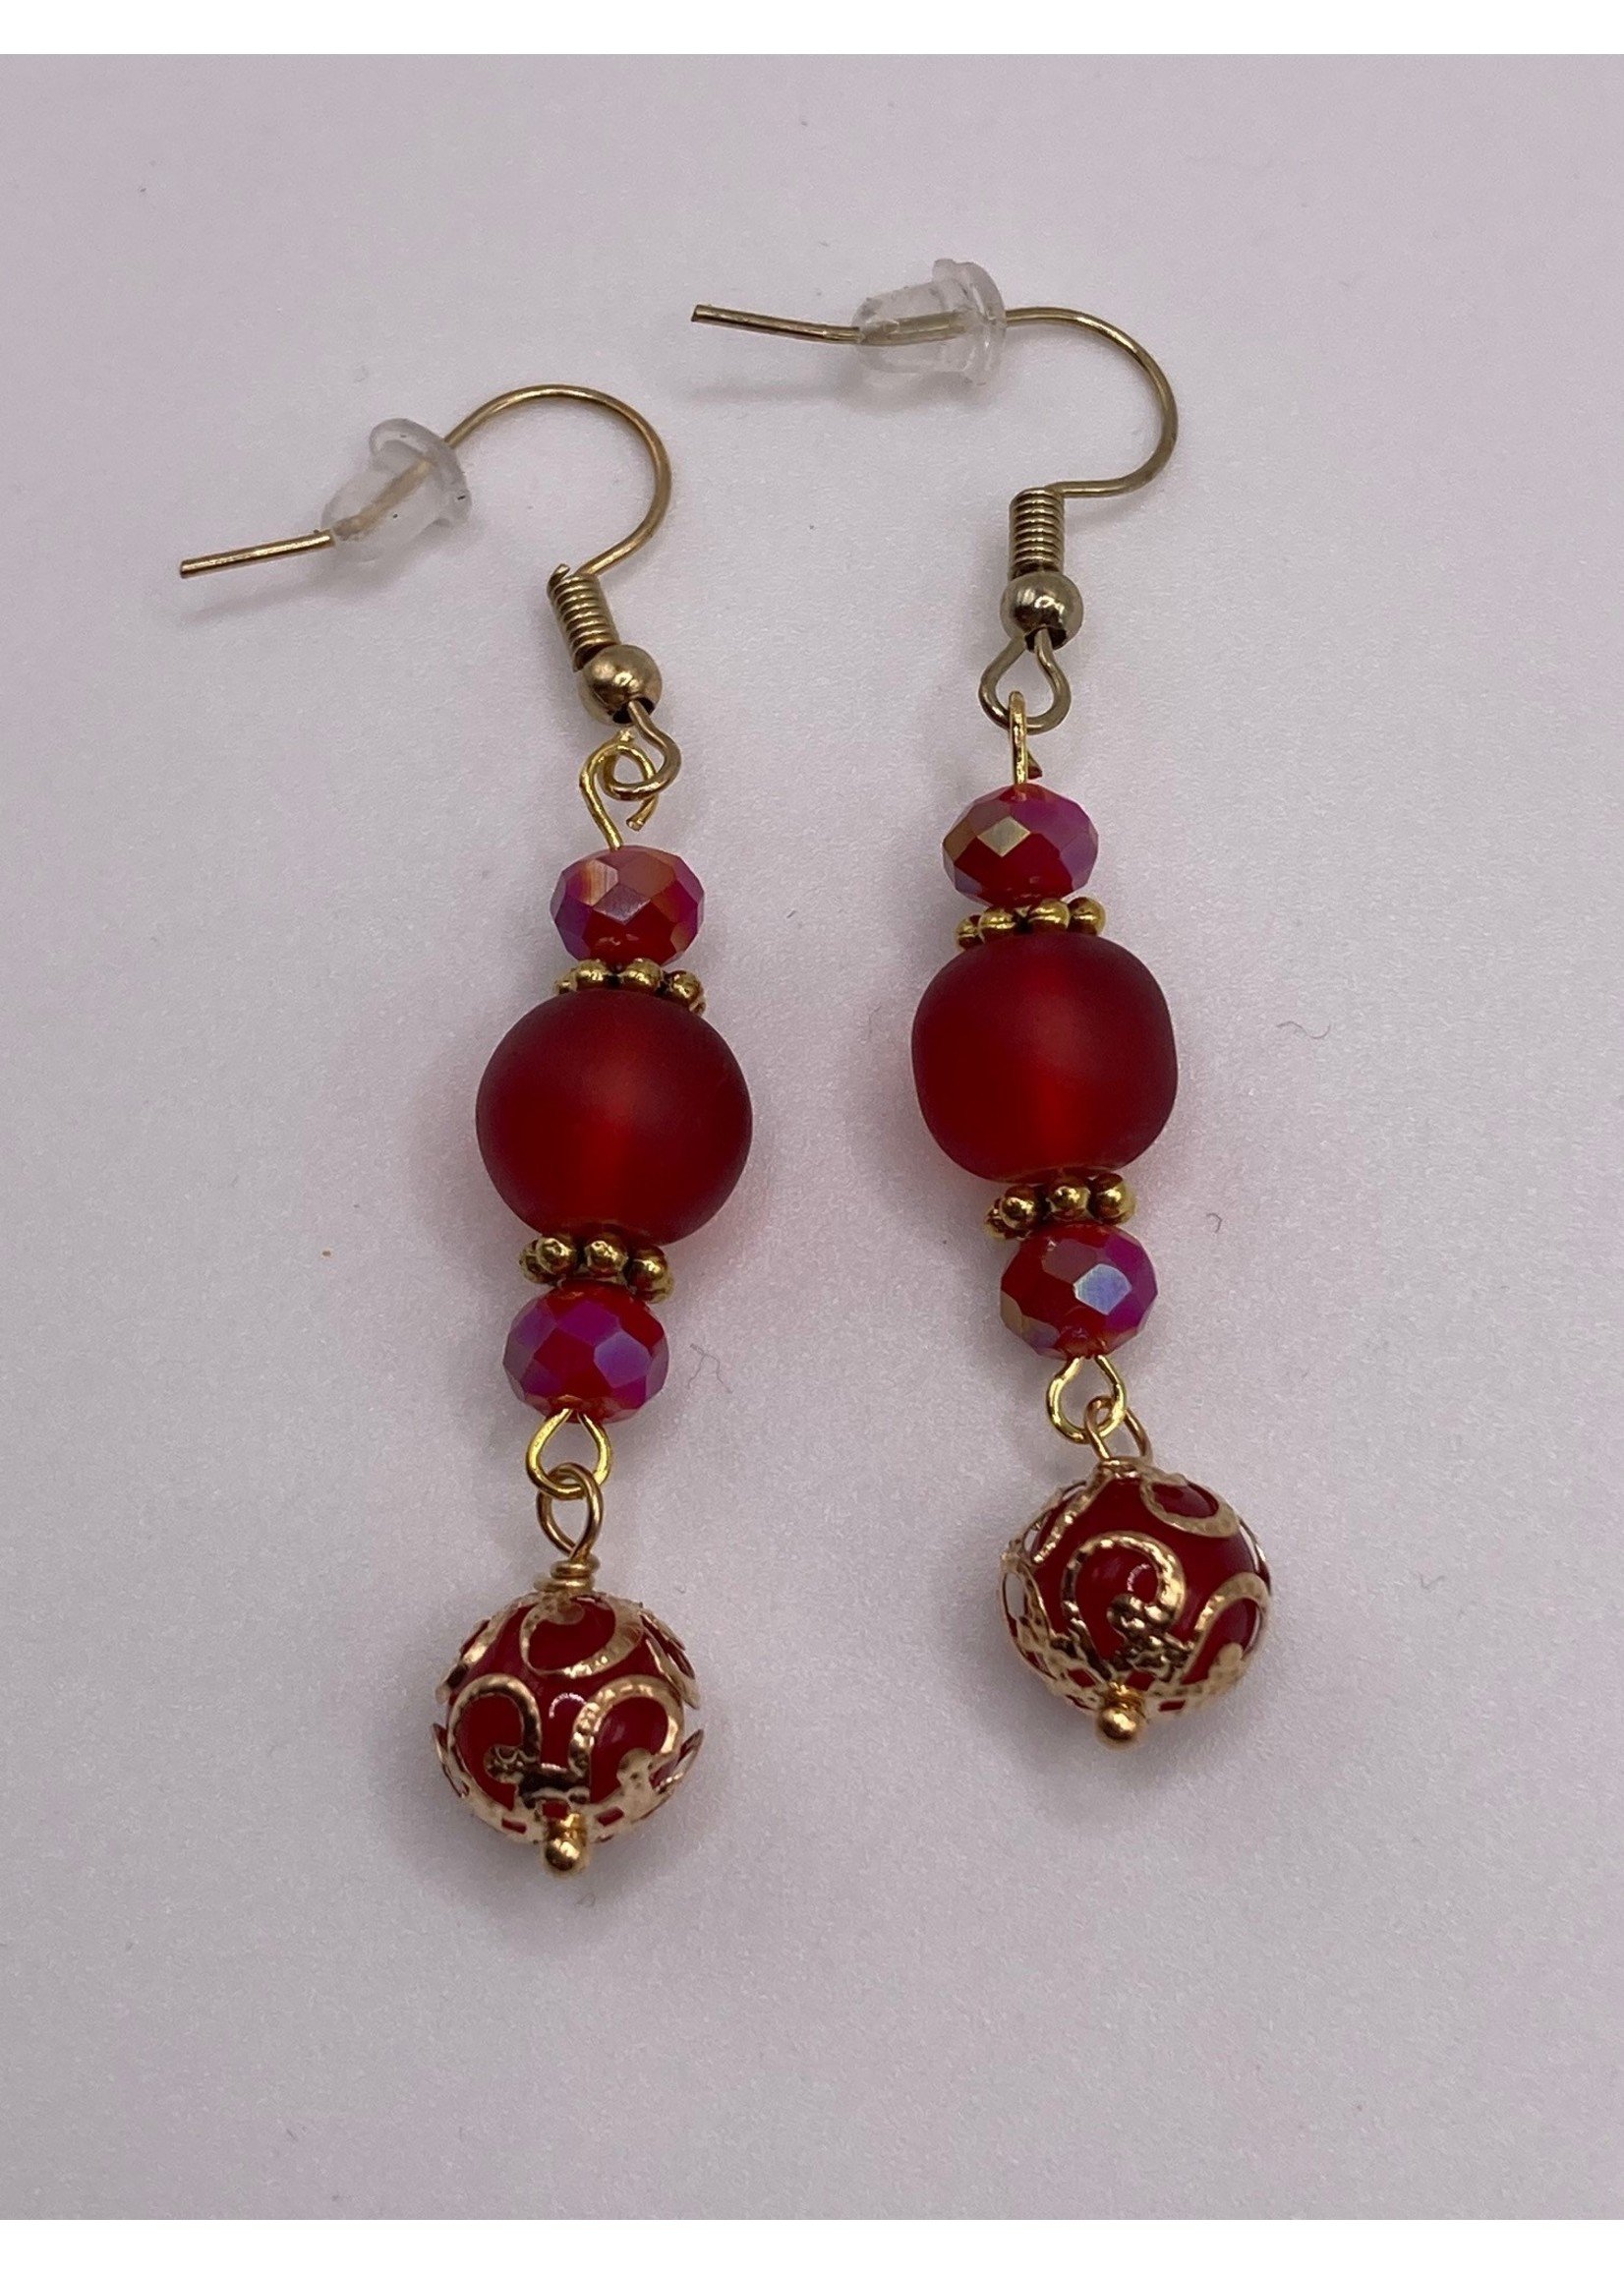 Our Twisted Dahlia Ruby Red Glass Beads and Gold Accent Earrings